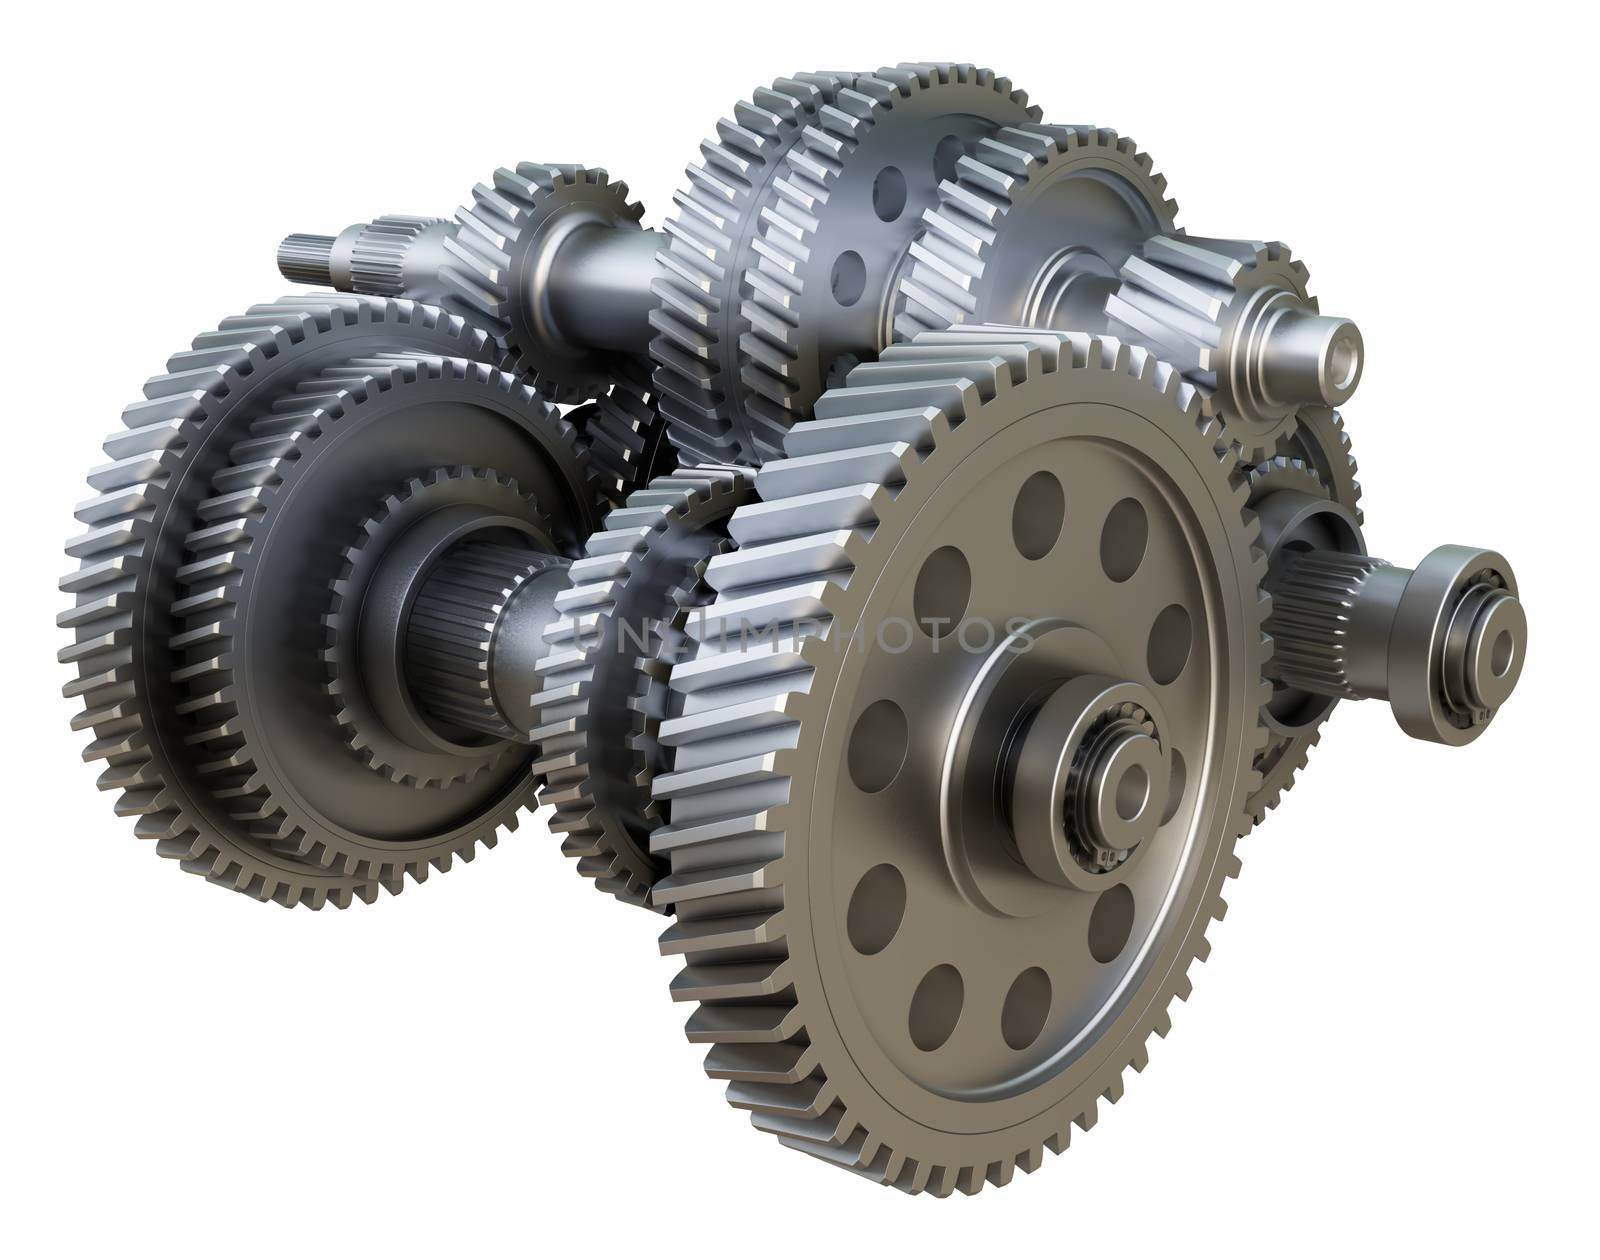 Gearbox concept. Metal gears, shafts and bearings on white background. 3D illustration. Industrial background